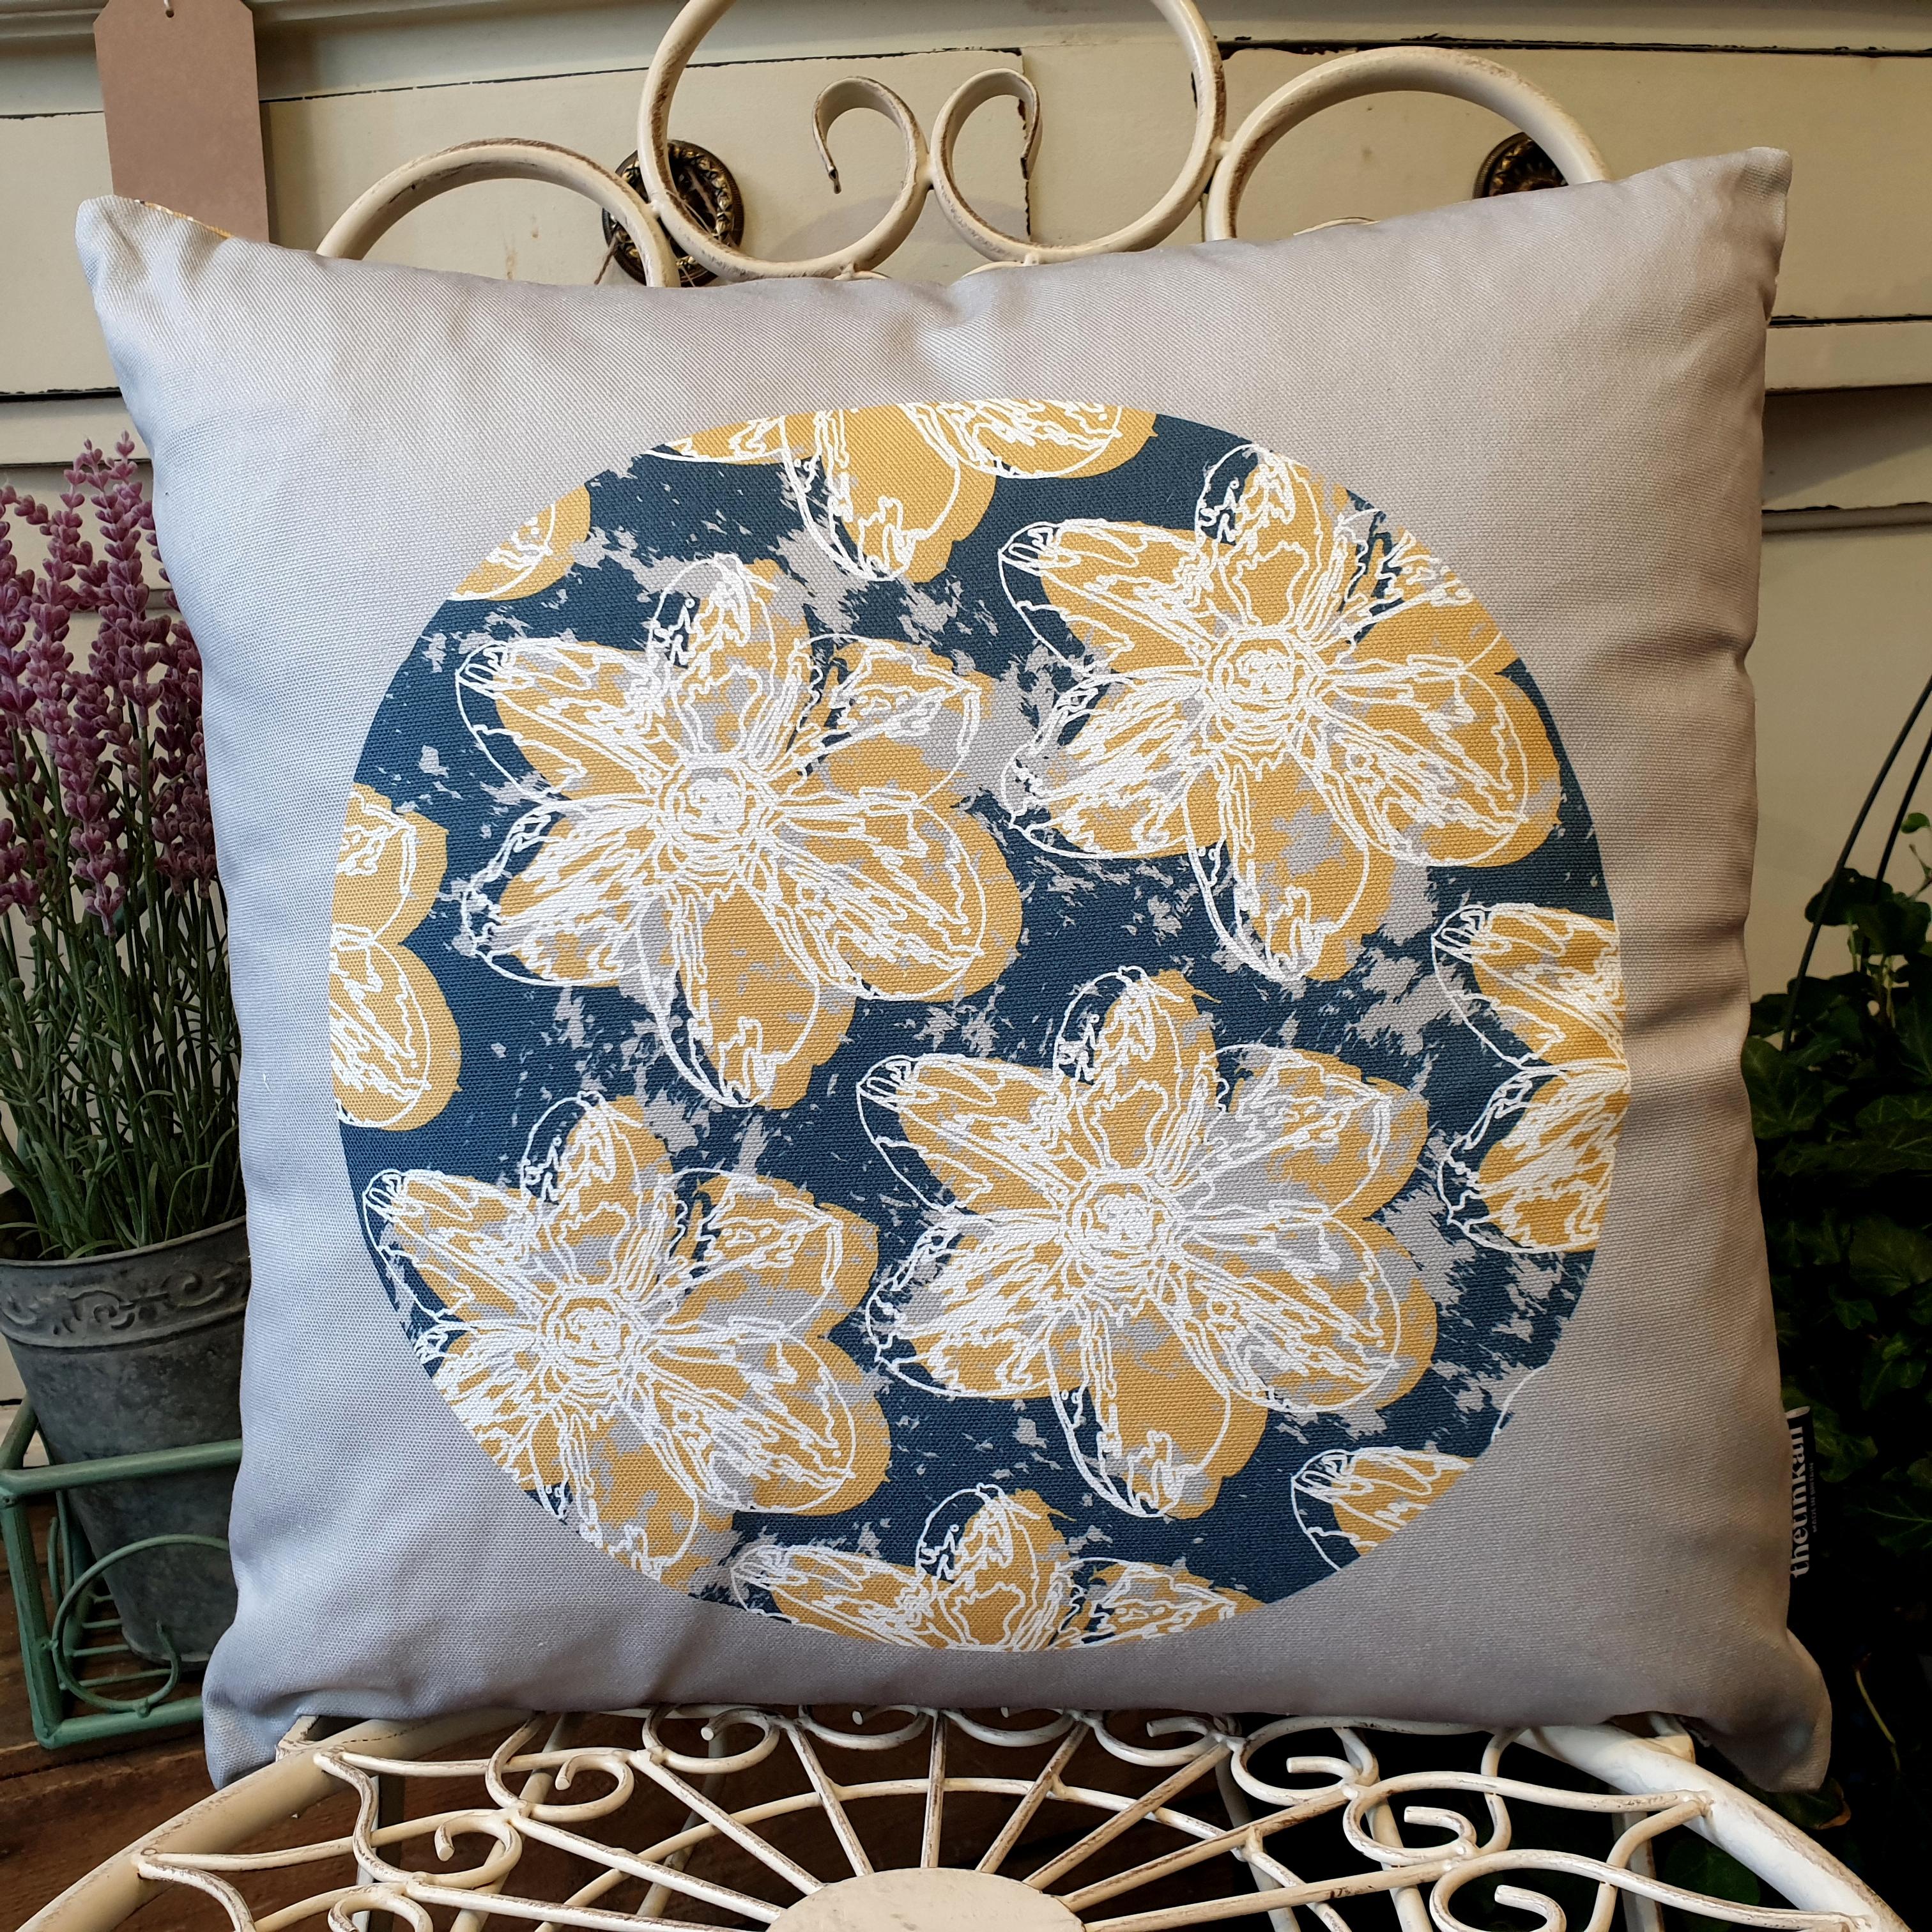 Double-sided 45cm square Flower Splash cushion designed by thetinkan. Mustard yellow narcissus flower with white traced outline set in an oxford blue coloured circle with pale grey paint splashes and pale grey surround. Available with an optional luxury cushion inner pad. VIEW PRODUCT >>